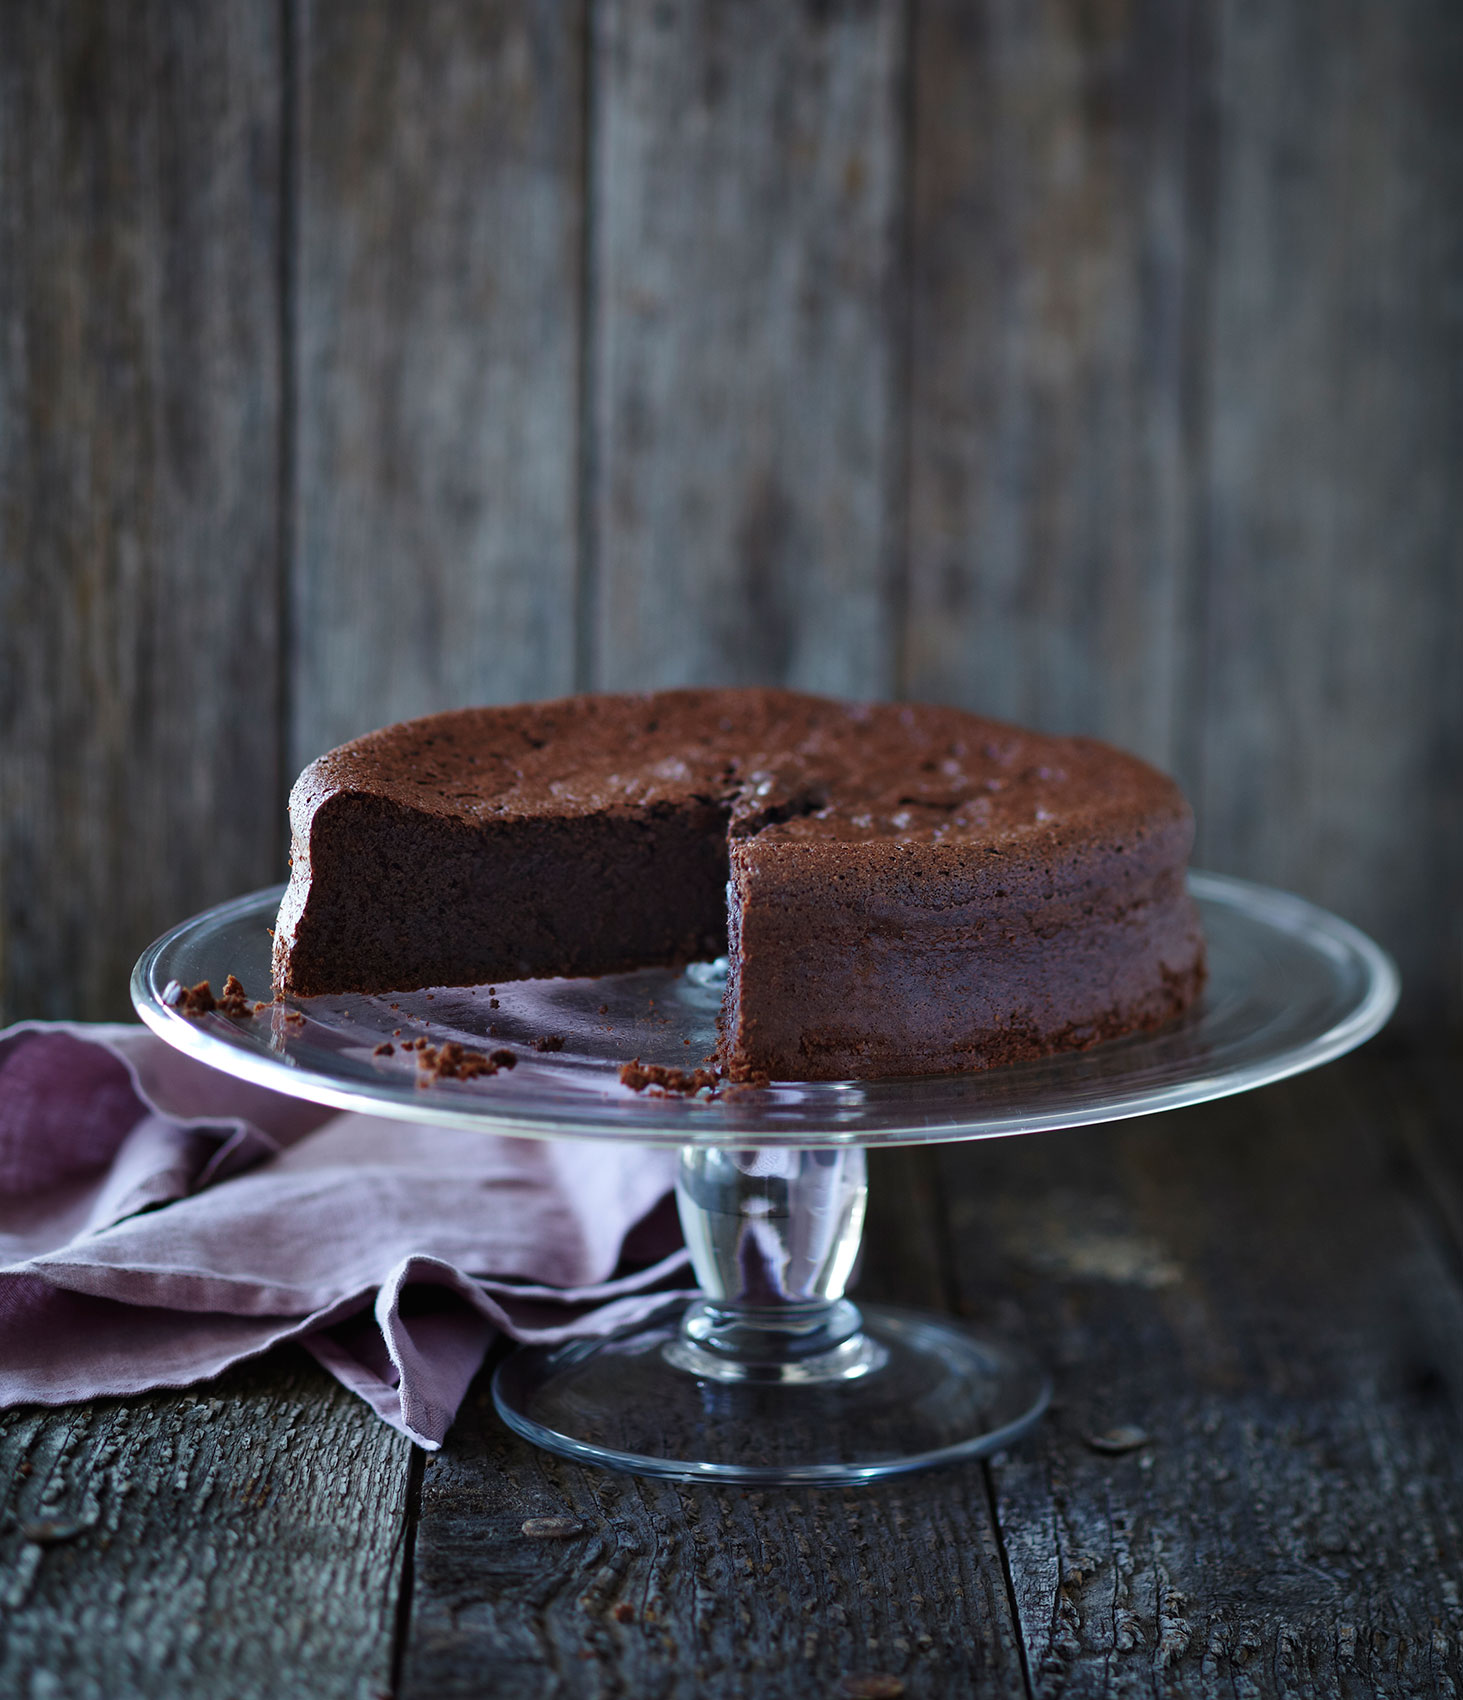 Free Range in the City • Rich Round Sliced Chocolate Cake on Glass Stand • Cookbook & Lifestyle Food Photography